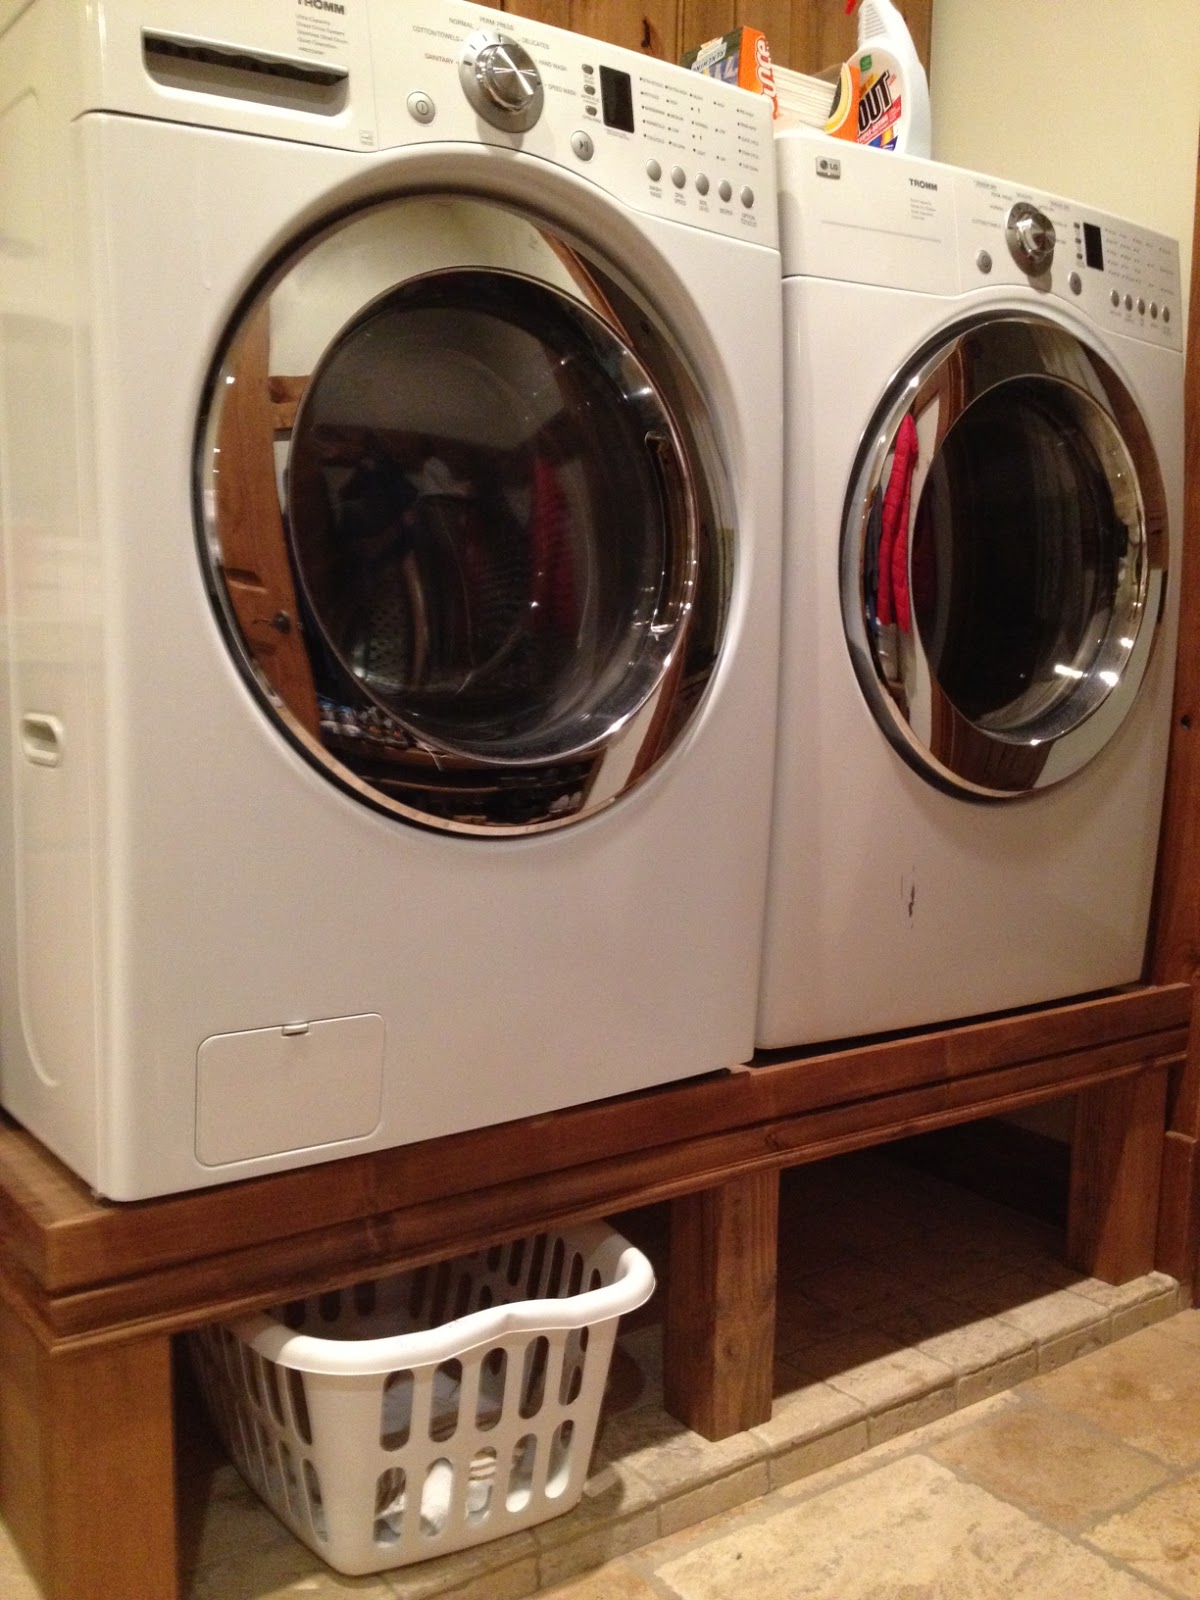 dad-built-this-washing-and-dryer-stand